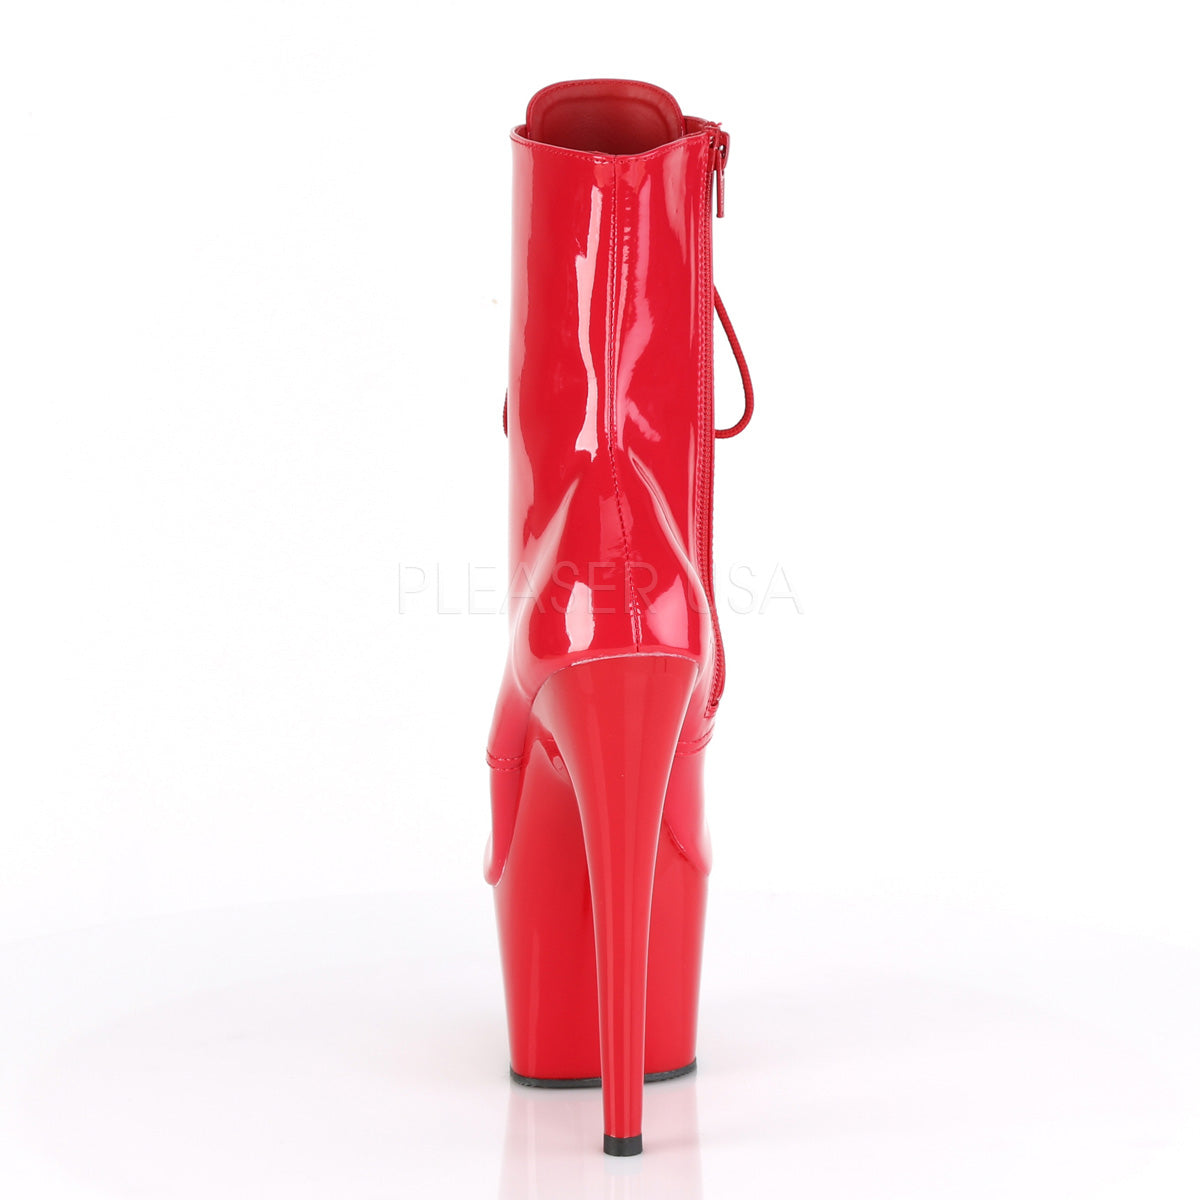 Sexy Devil 7 Inches Red Patent Ankle Boots